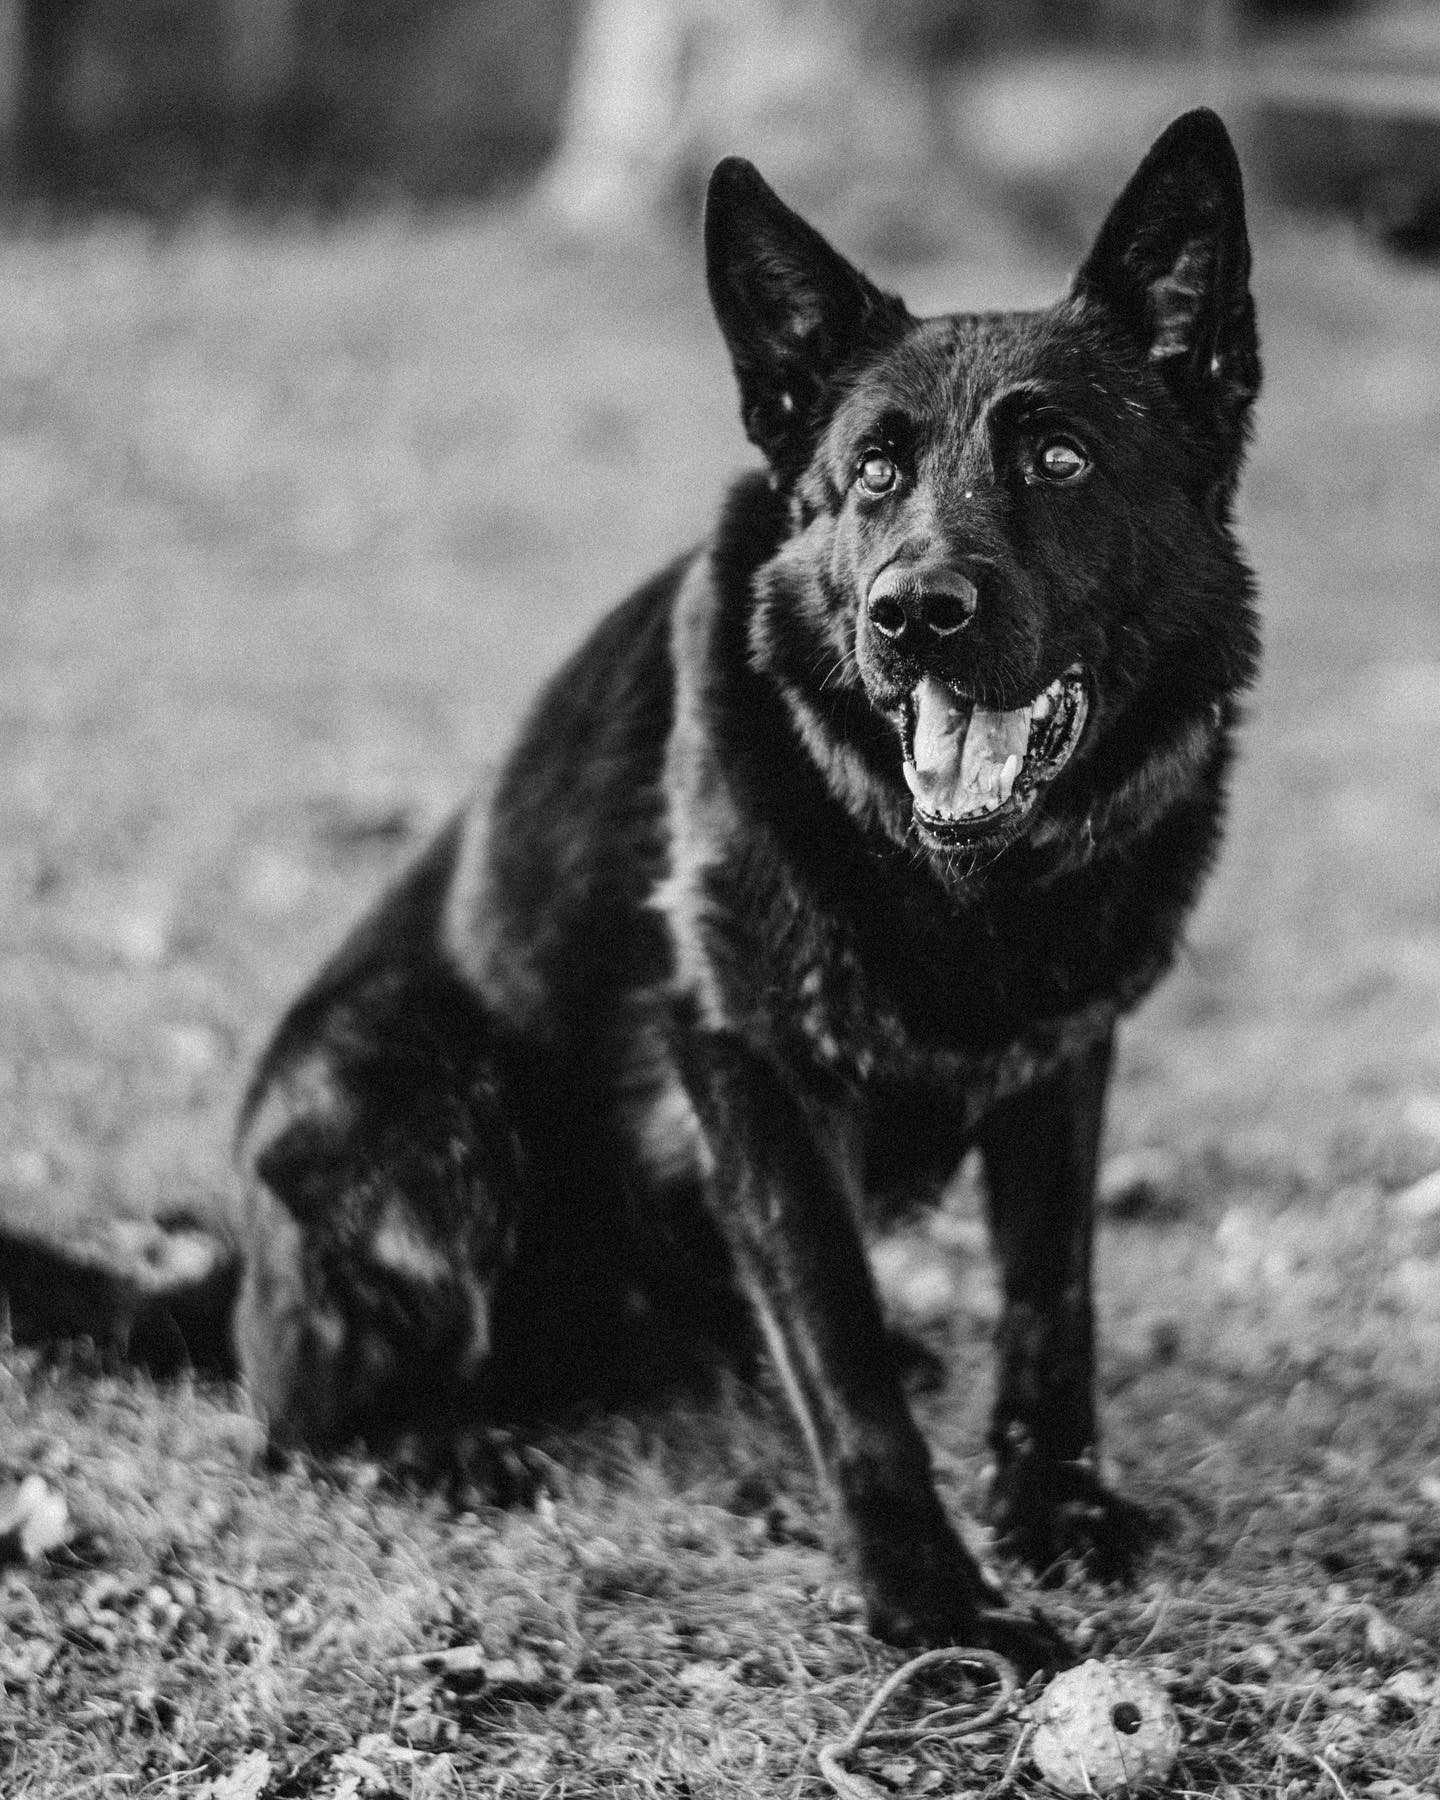 K9 Broko | Connecticut State Police, Connecticut